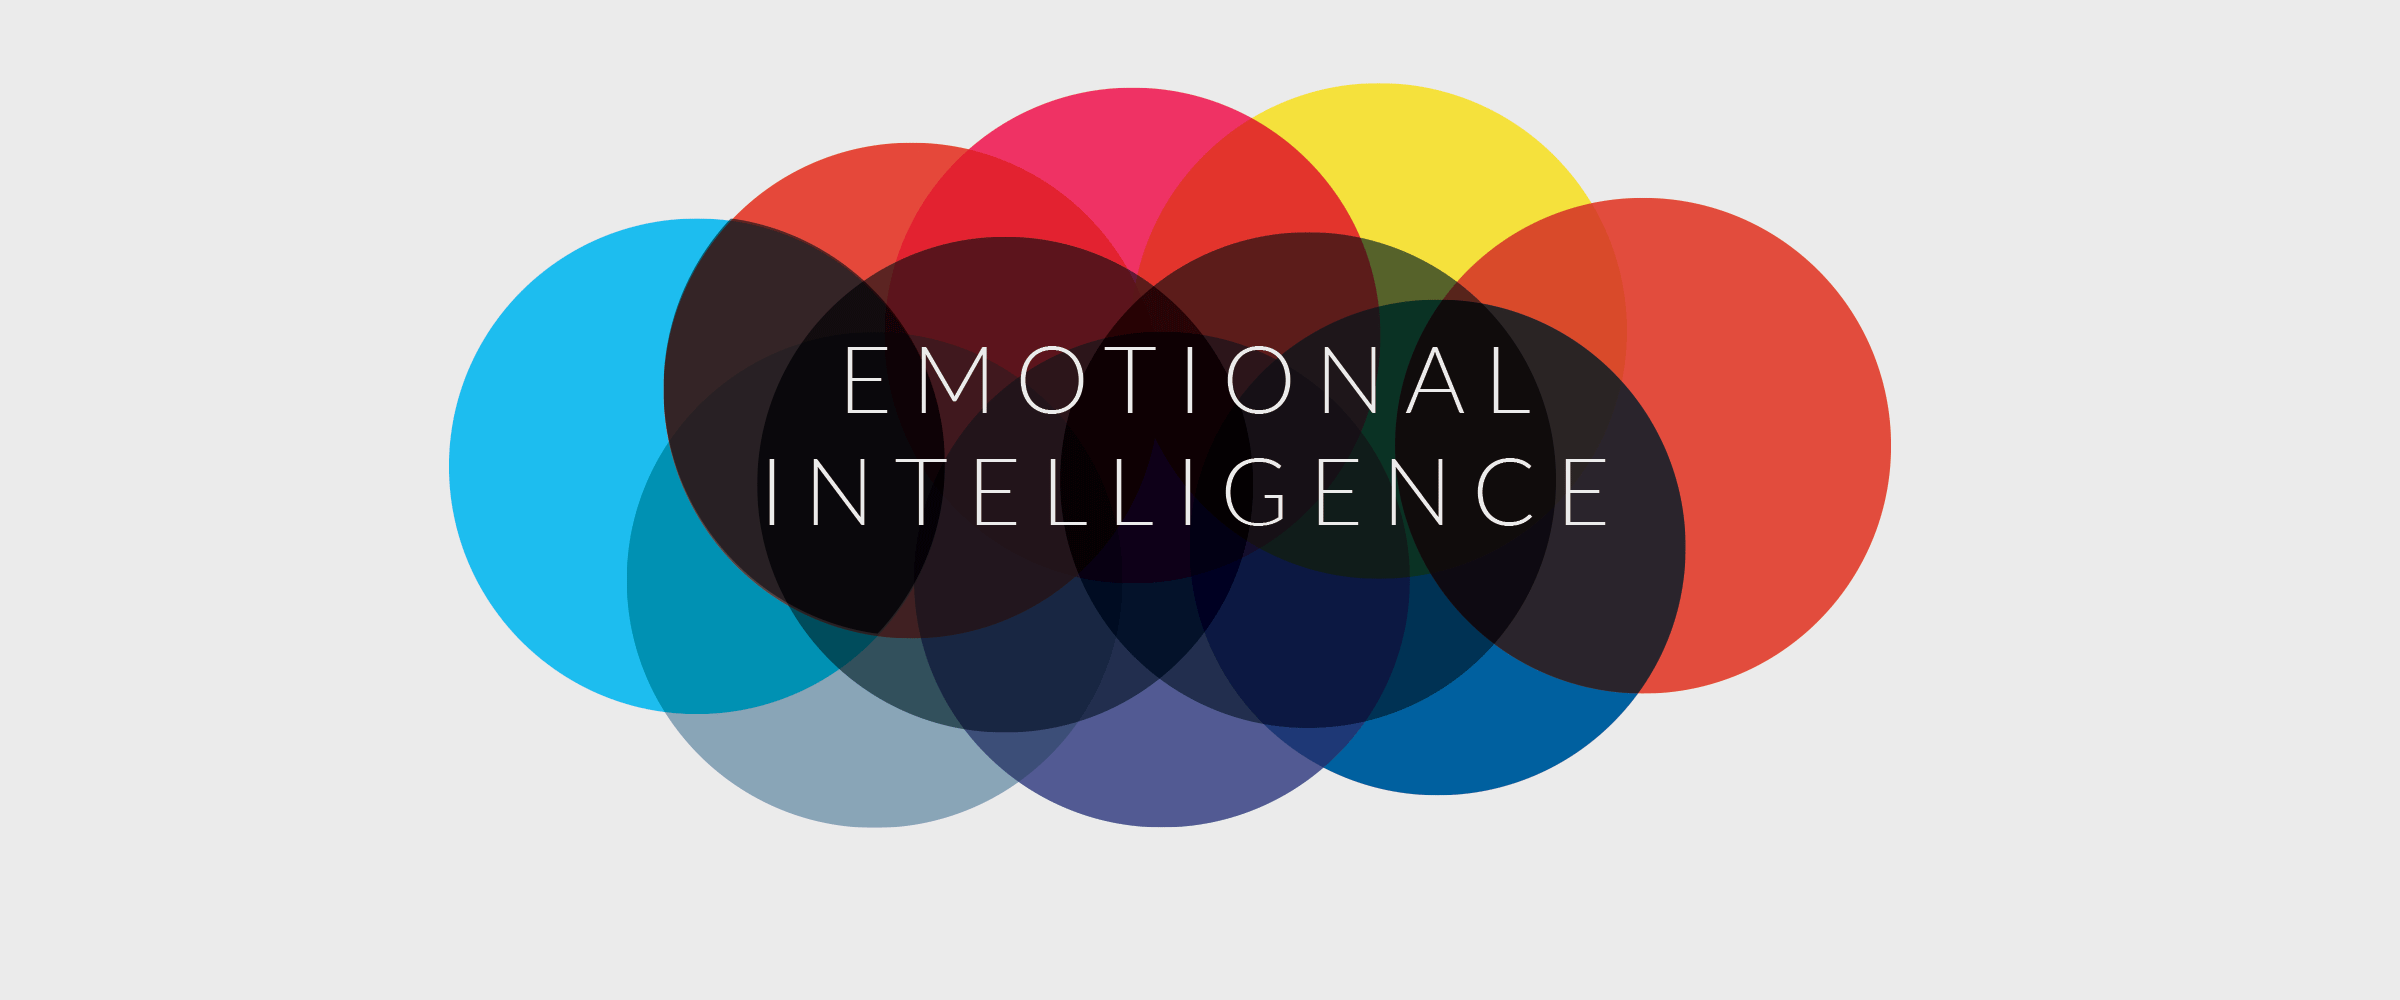 An image with overlapping colourful circles of red and blue and yellow, with words on top: Emotional intelligence.